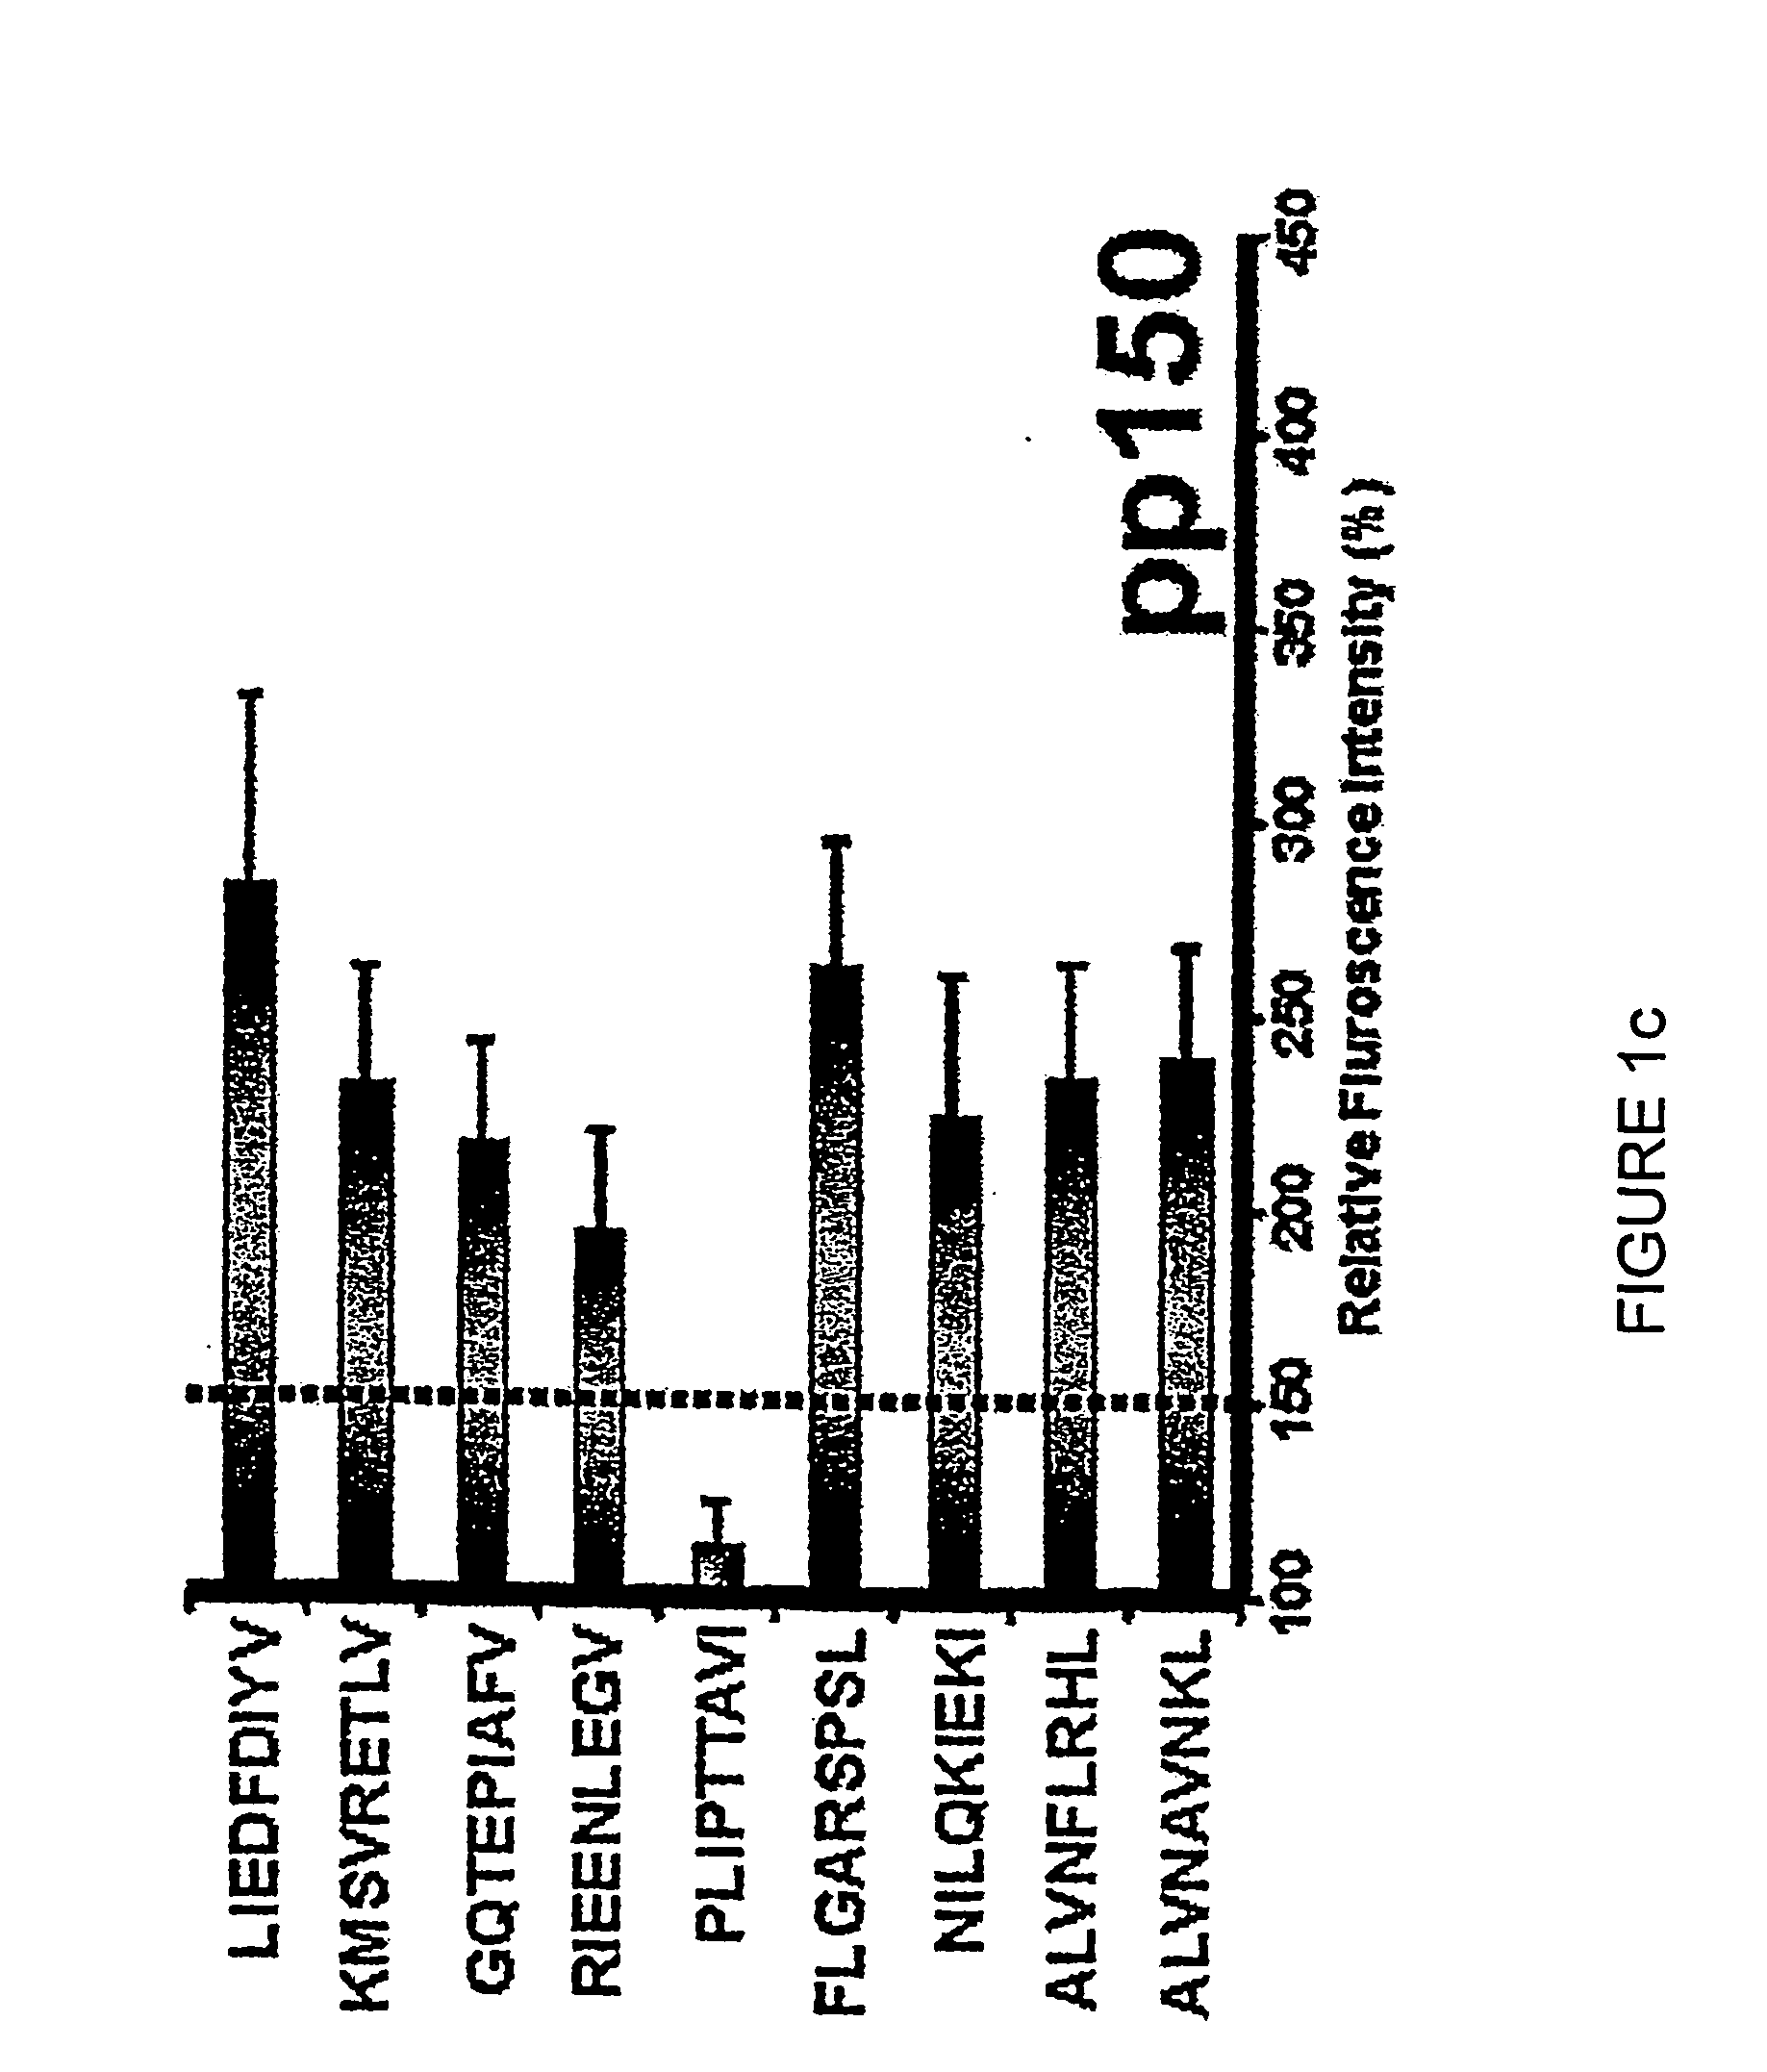 Novel human cytomegalovirus (hcmv) cytotoxic t cell epitopes, polyepitopes compositions comprising same and diagnostic and prophylactic and therapeutic uses therefor